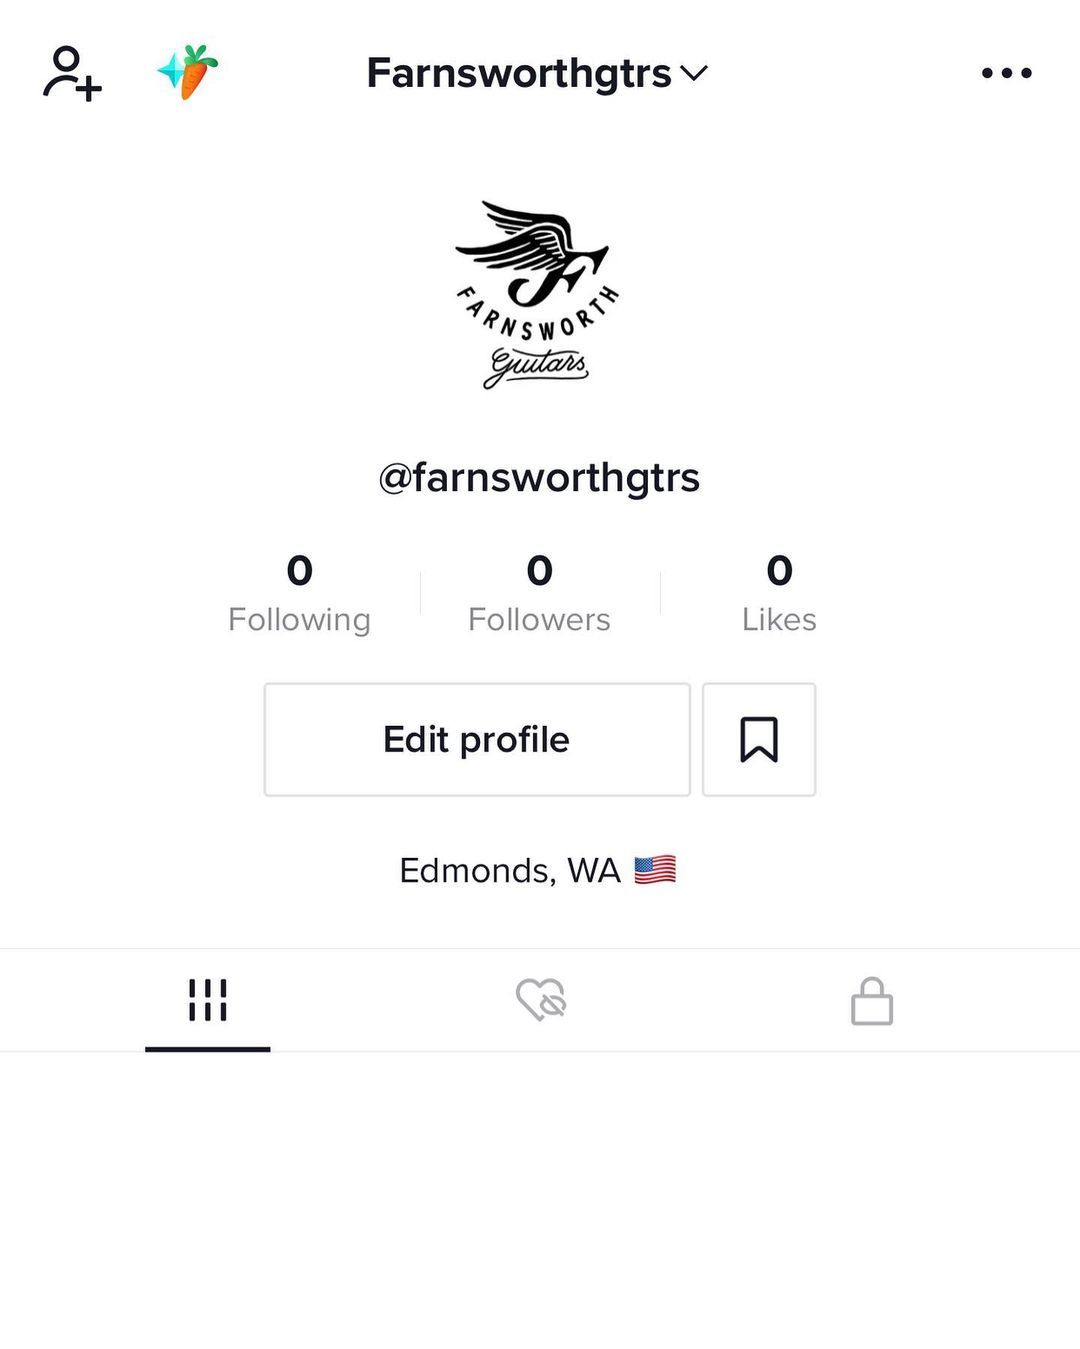 0 likes has never felt so good. It’s me and how to tone your abs vids. Join me on TikTok.
Might be a little while until I begin posting again, but join me if you’re inclined. I’ll pick back up with punk rock, guitar making, non alcoholic beers,...